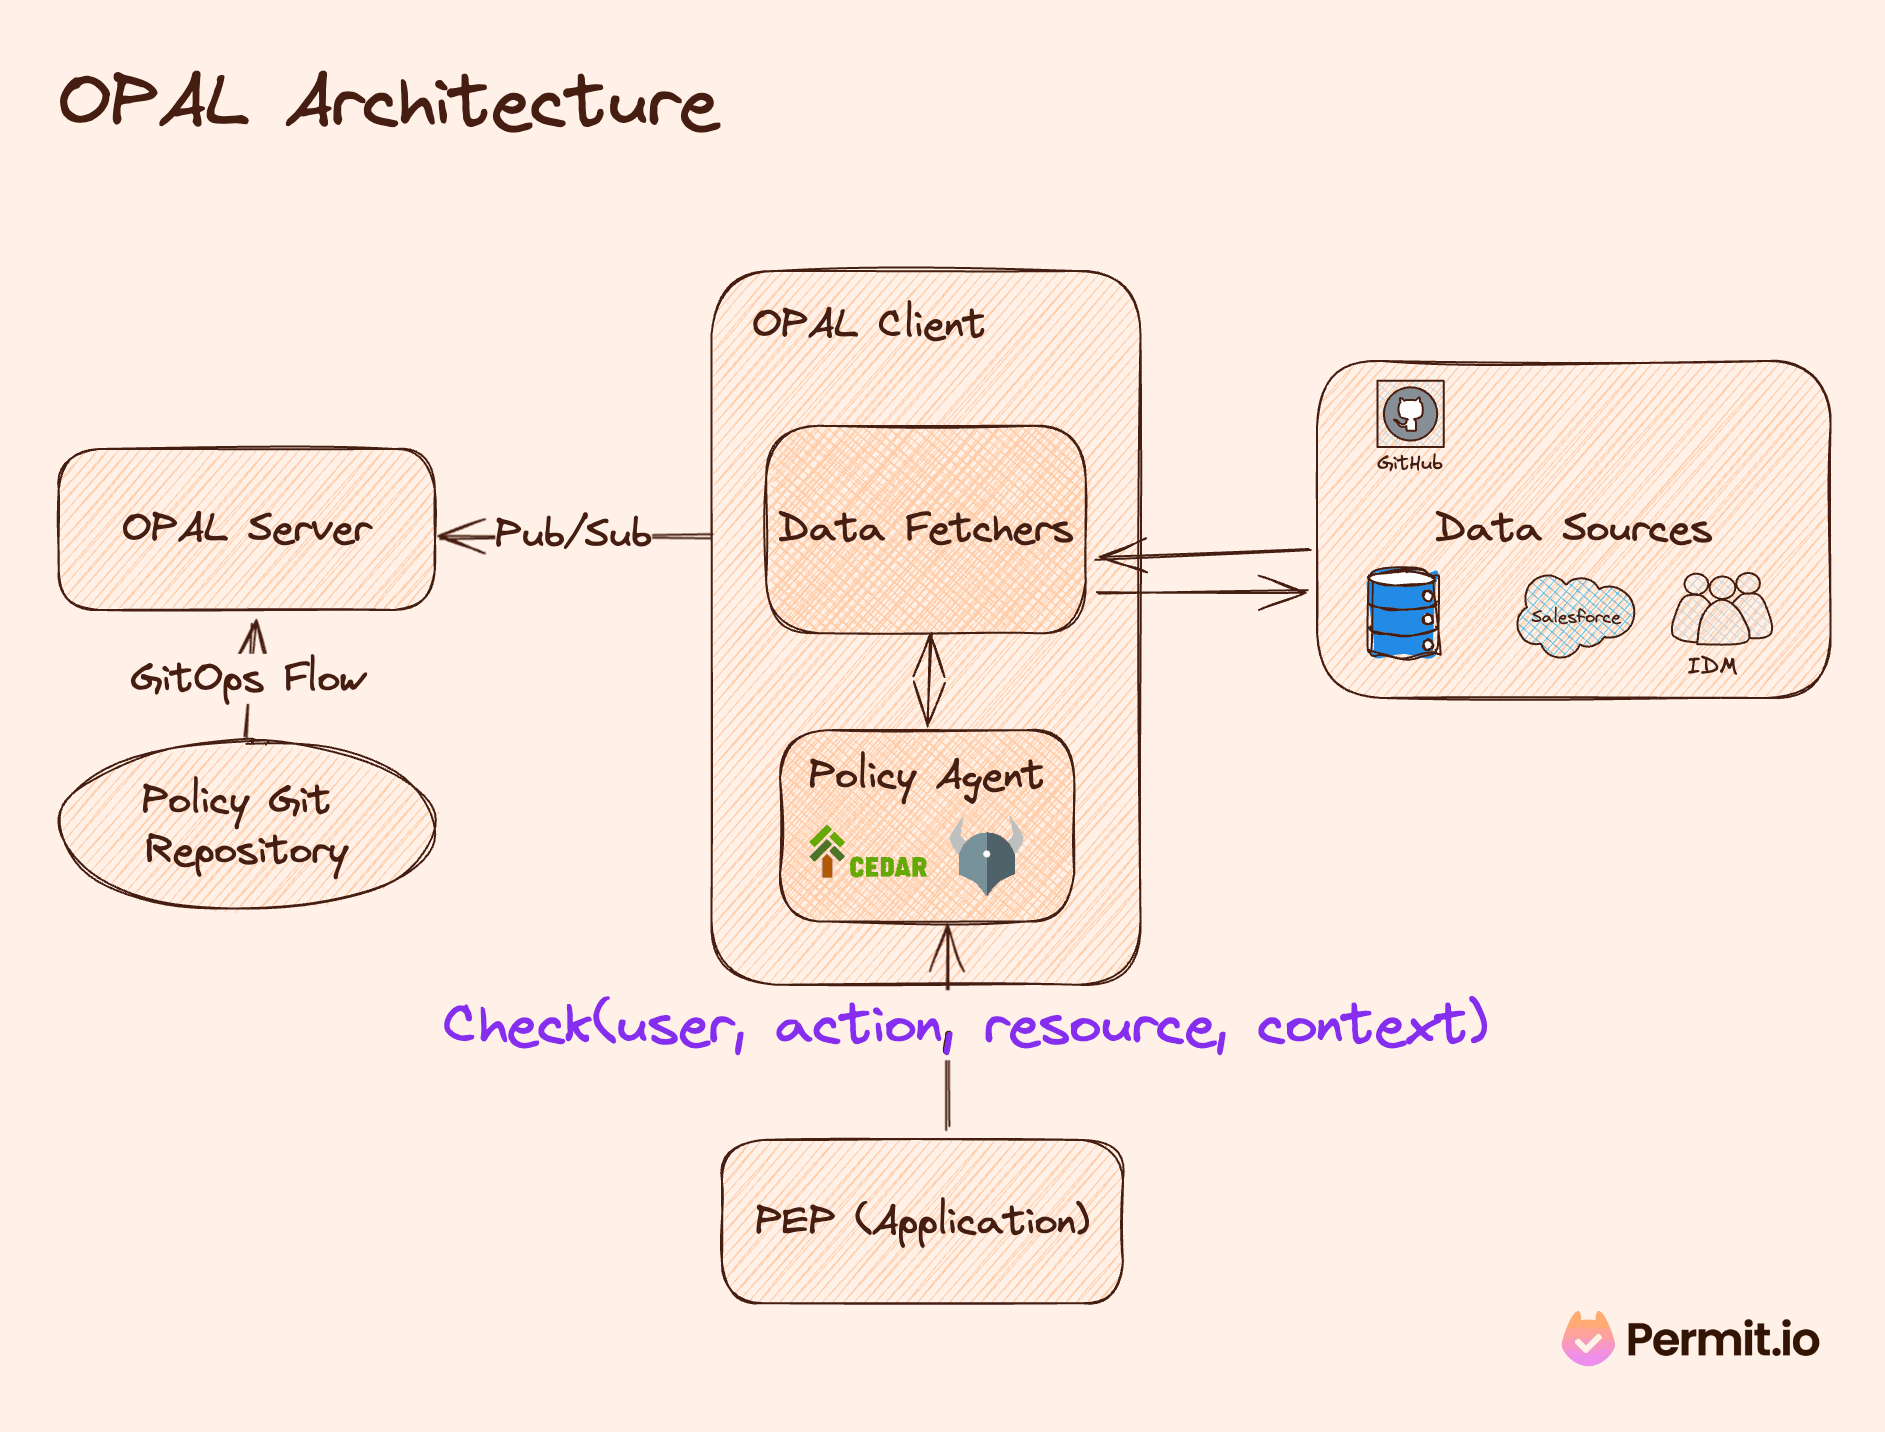 OPAL system architecture